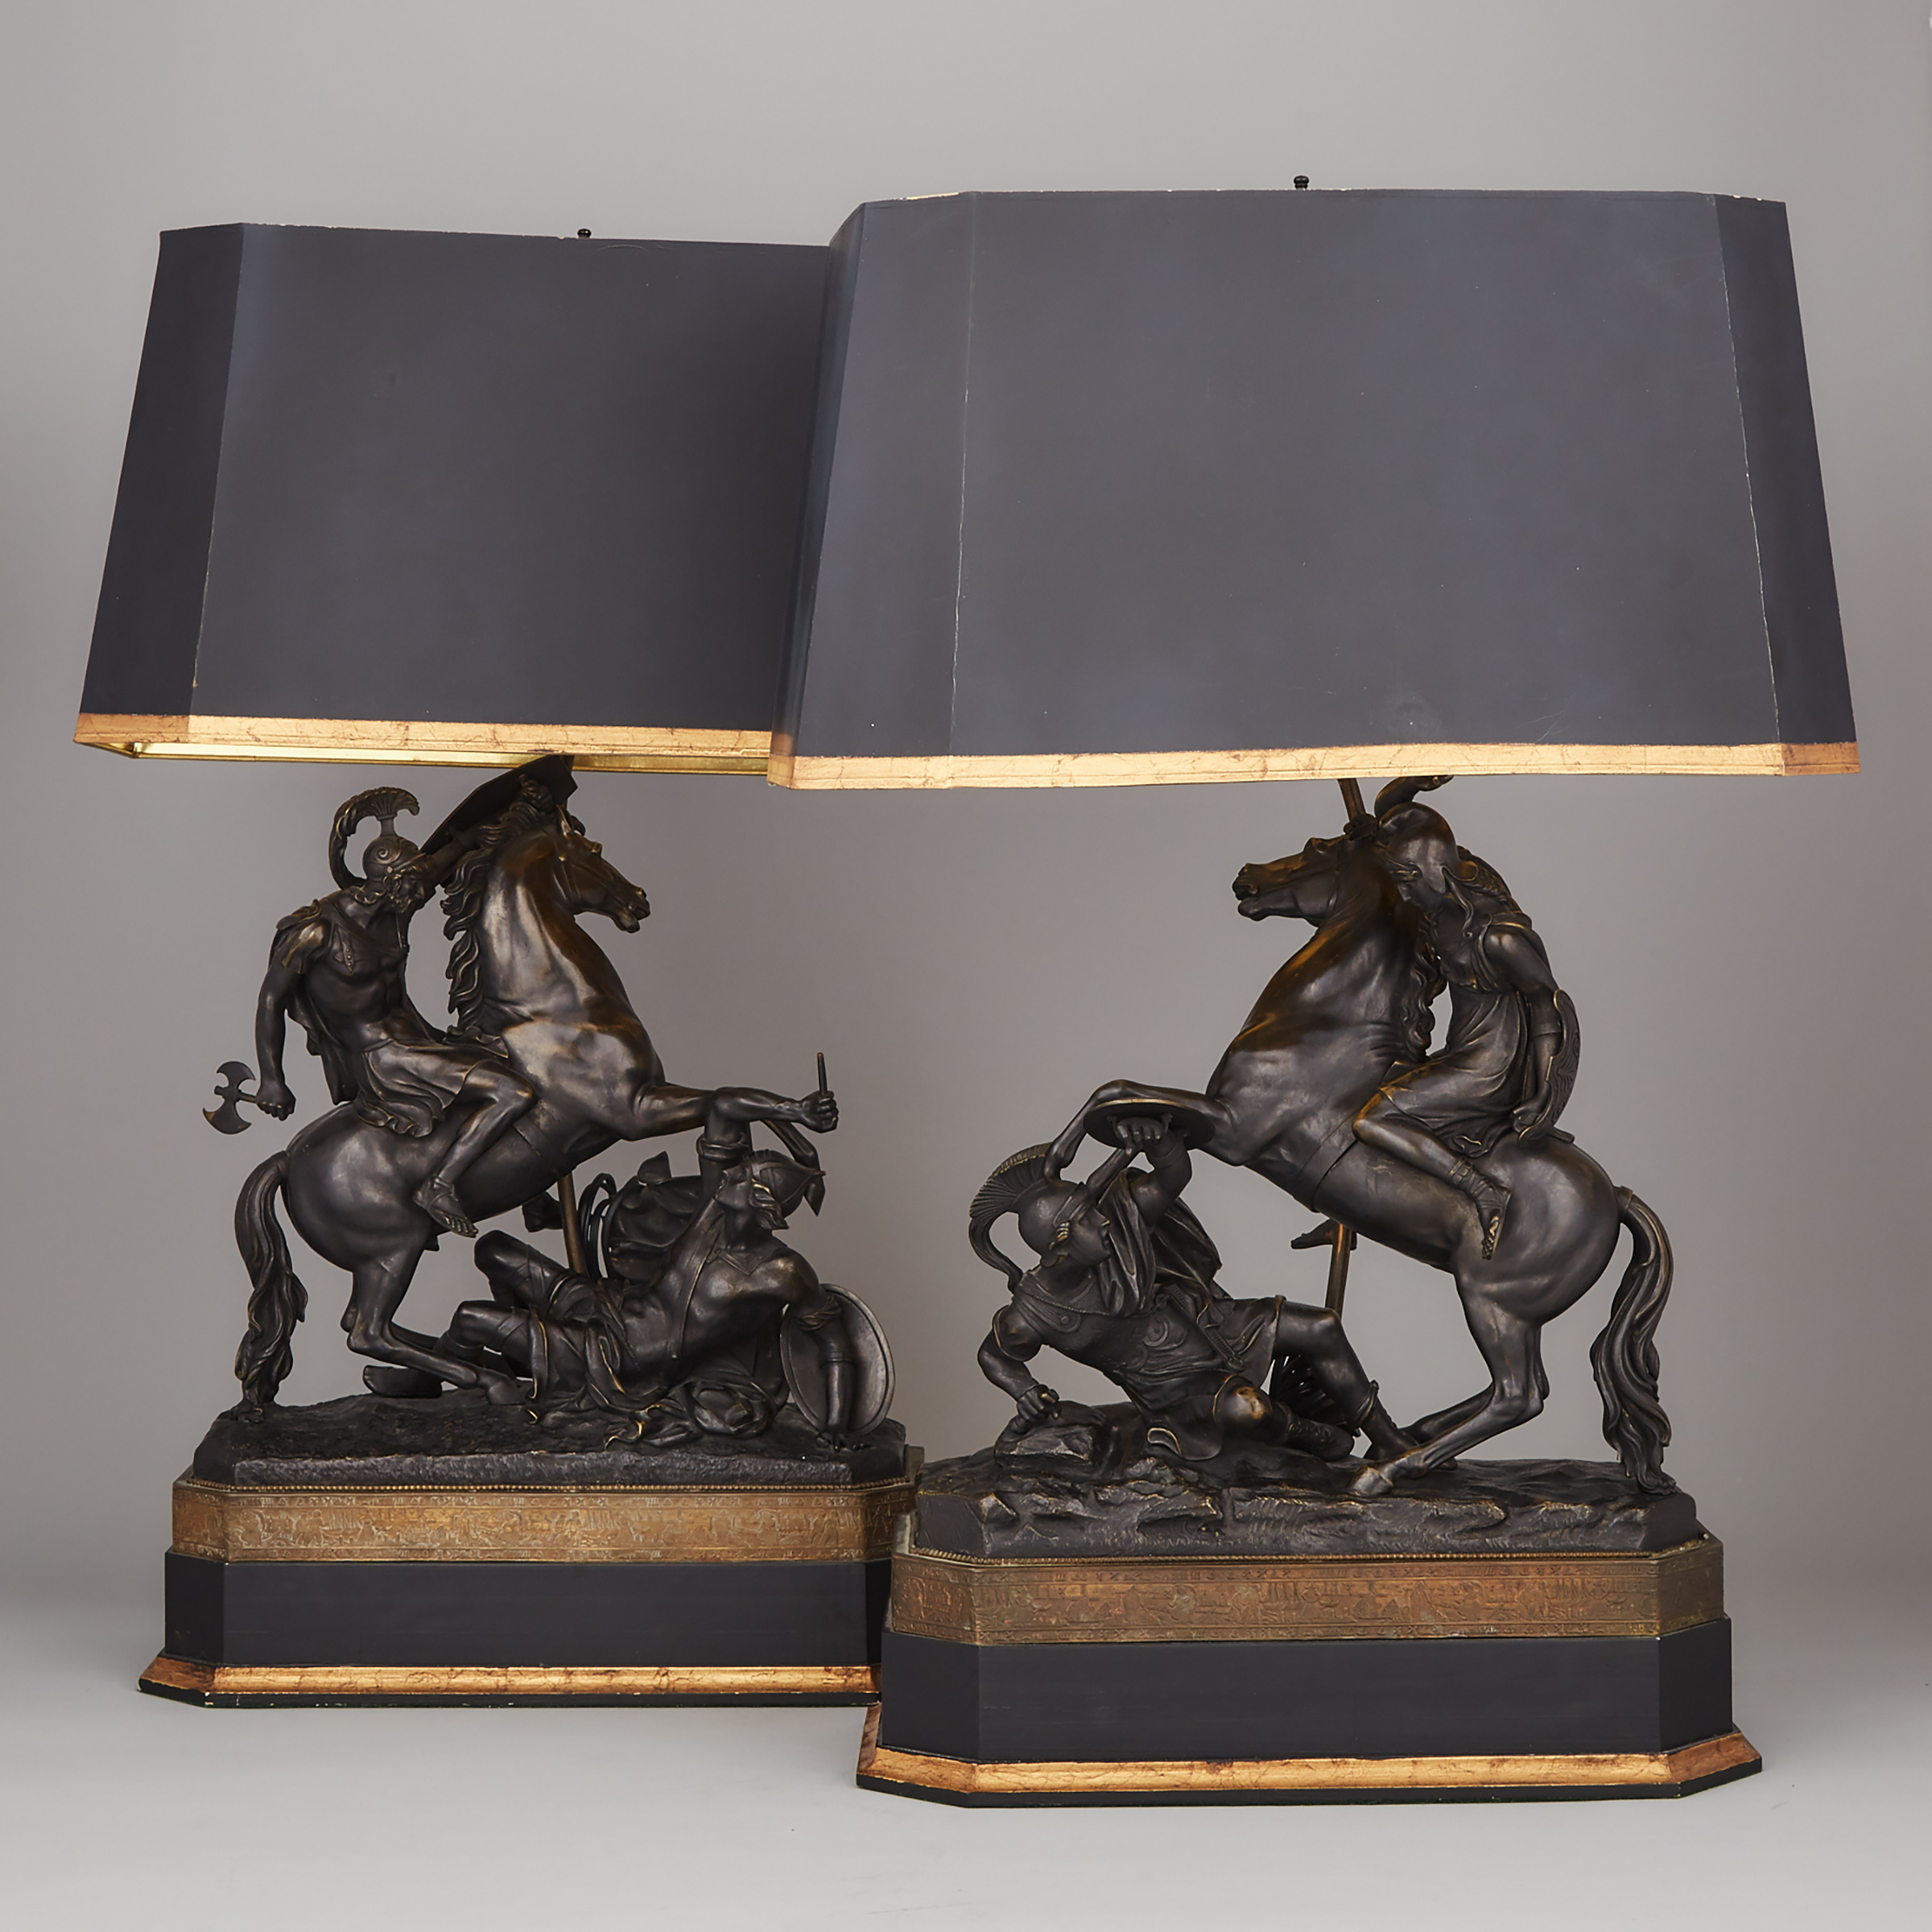 Pair of French Patinated Bronze Norman/Roman Equestrian Warrior Groups, 19th/20th century